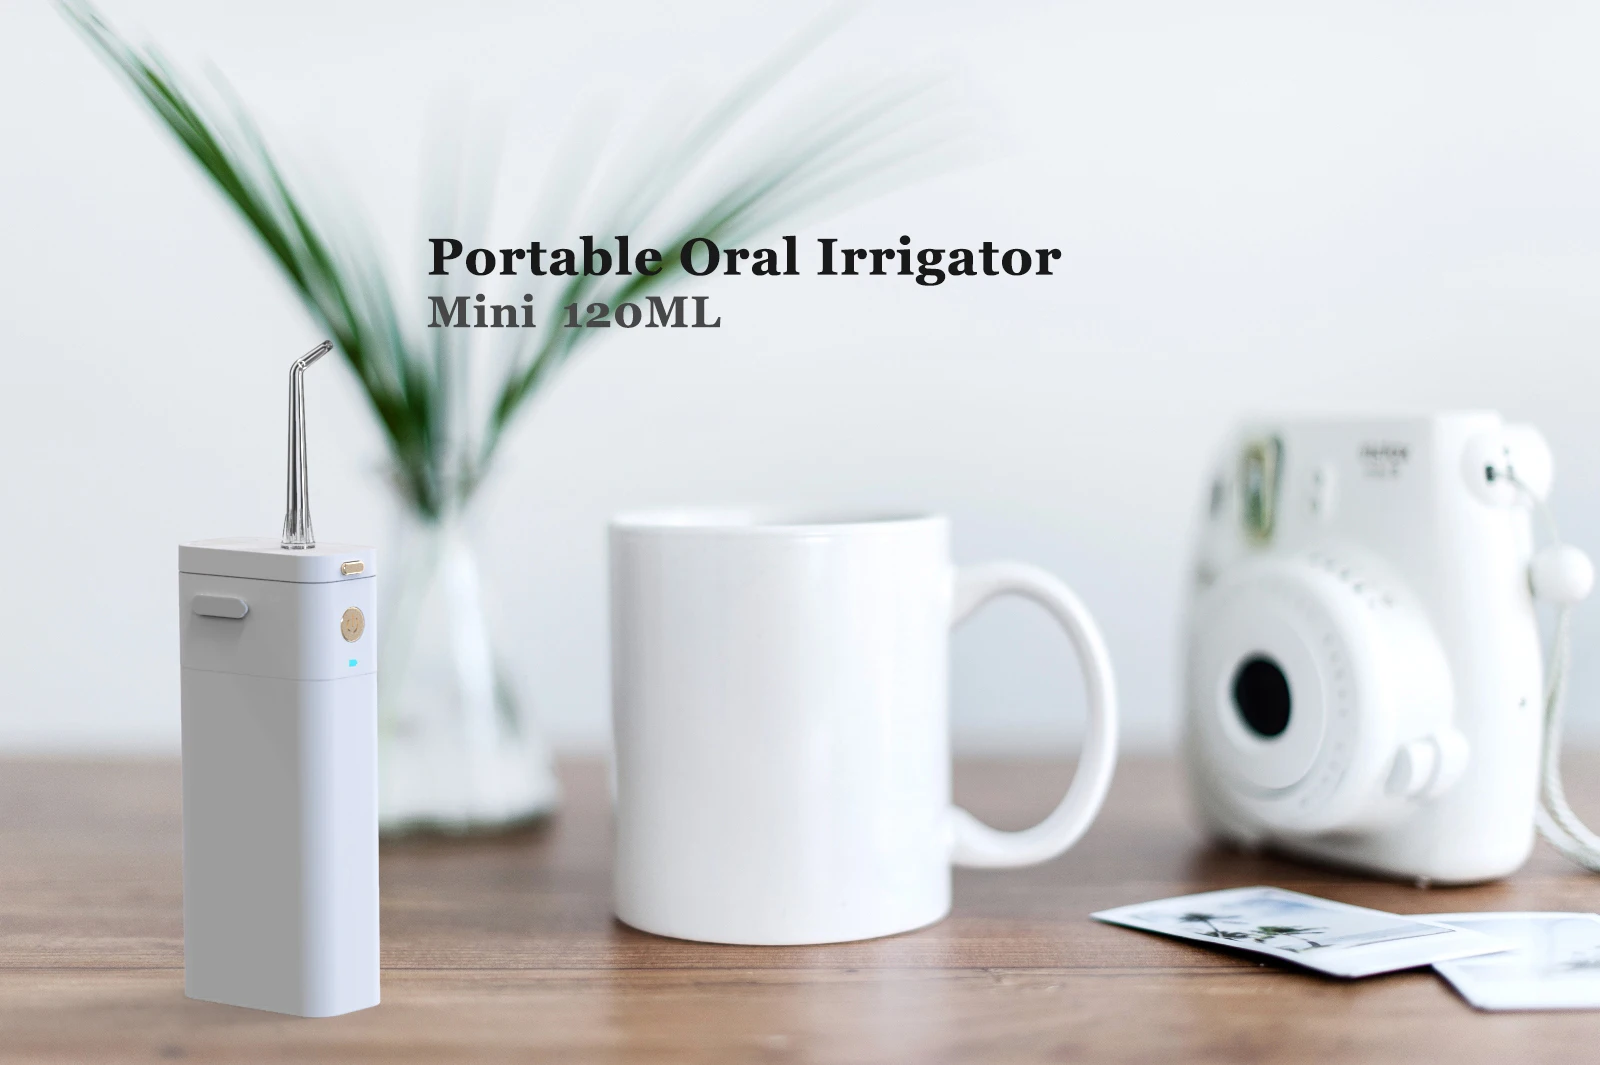 
IPX7 multi-mode portable oral irrigator cordless water electronic oral irrigator water flosser dental with Powerful Jet 